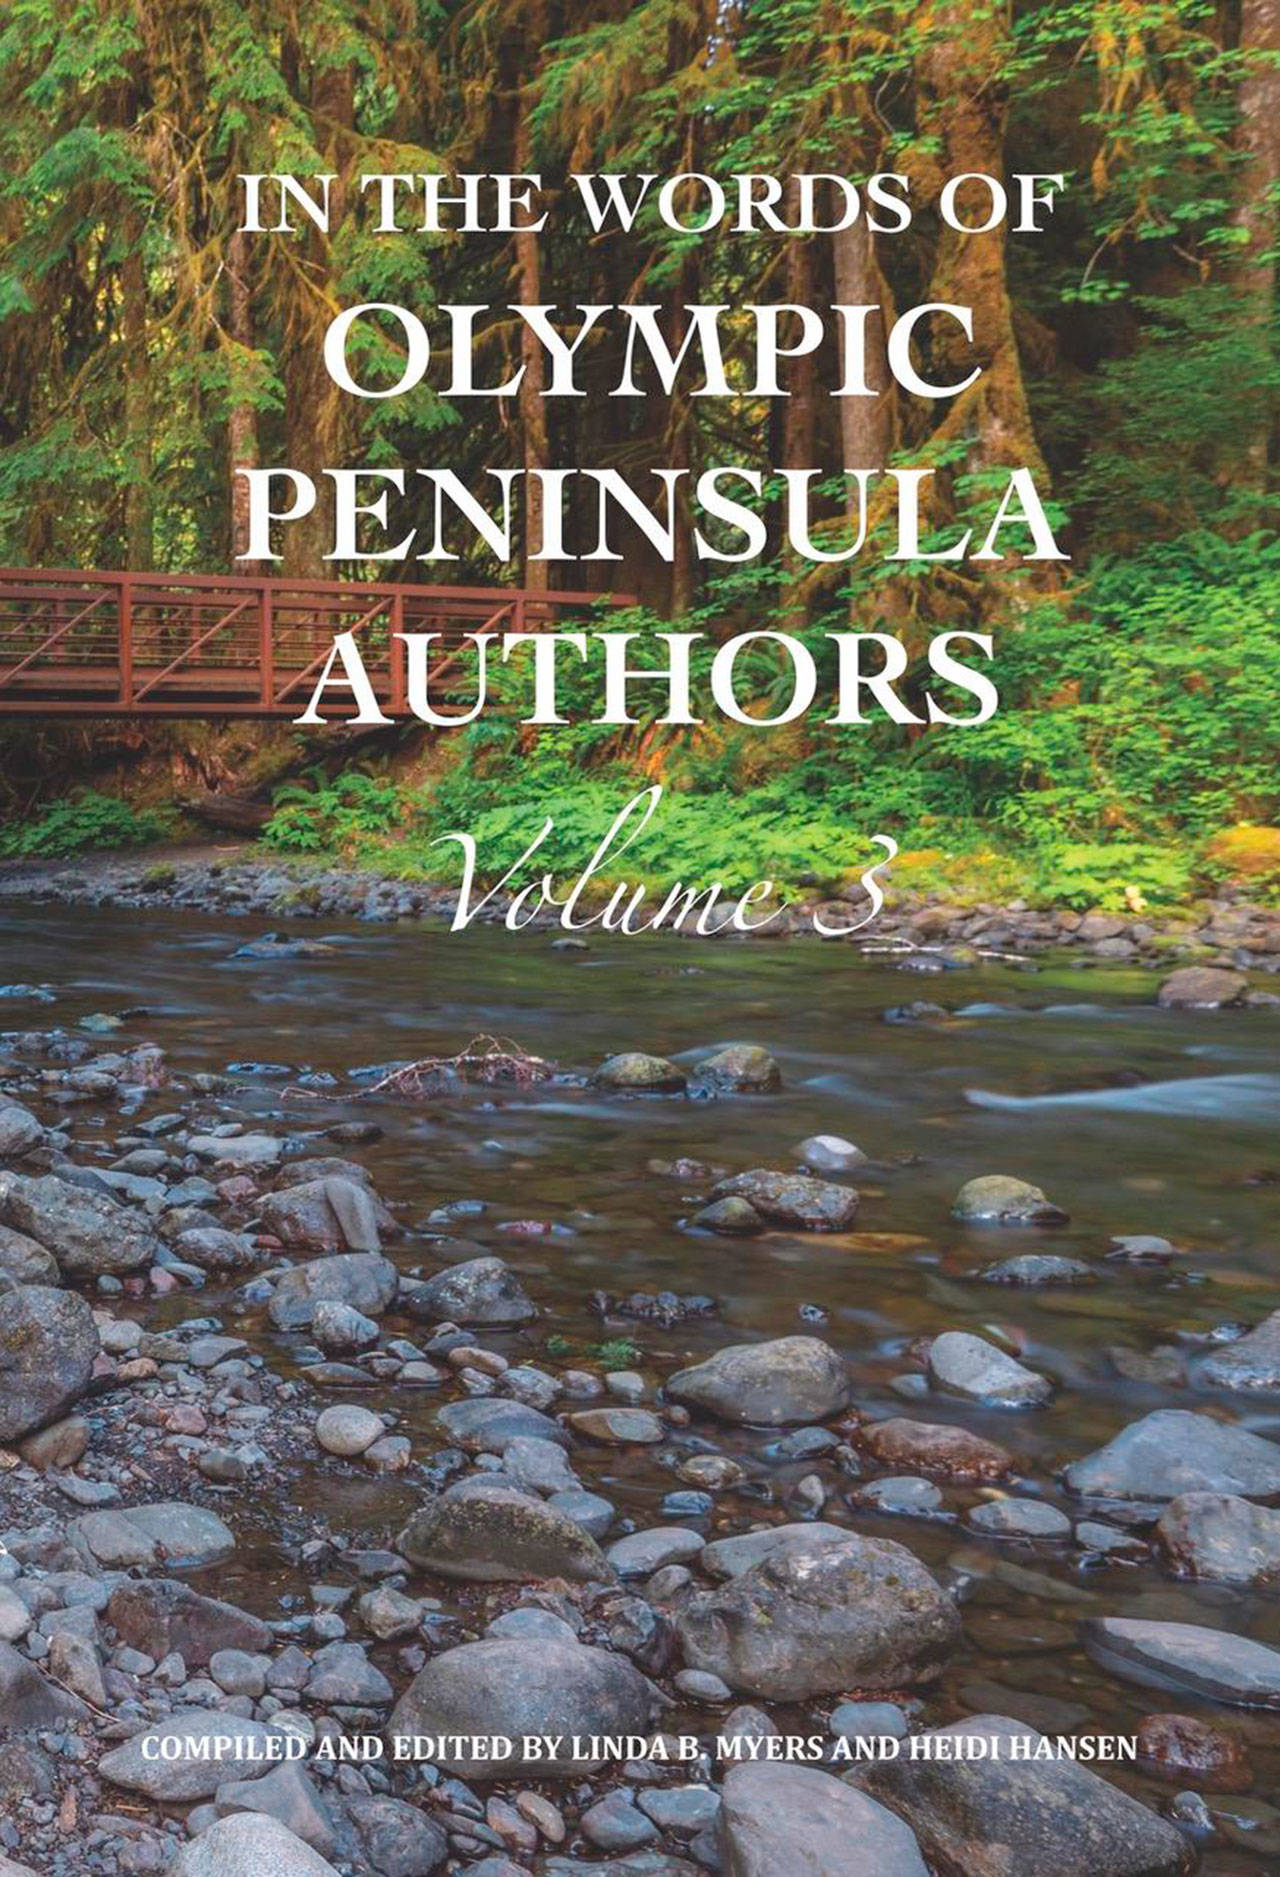 Local authors have set three fall presentations/readings of “In the Words of Olympic Peninsula Authors, Vol. 3.” Submitted art